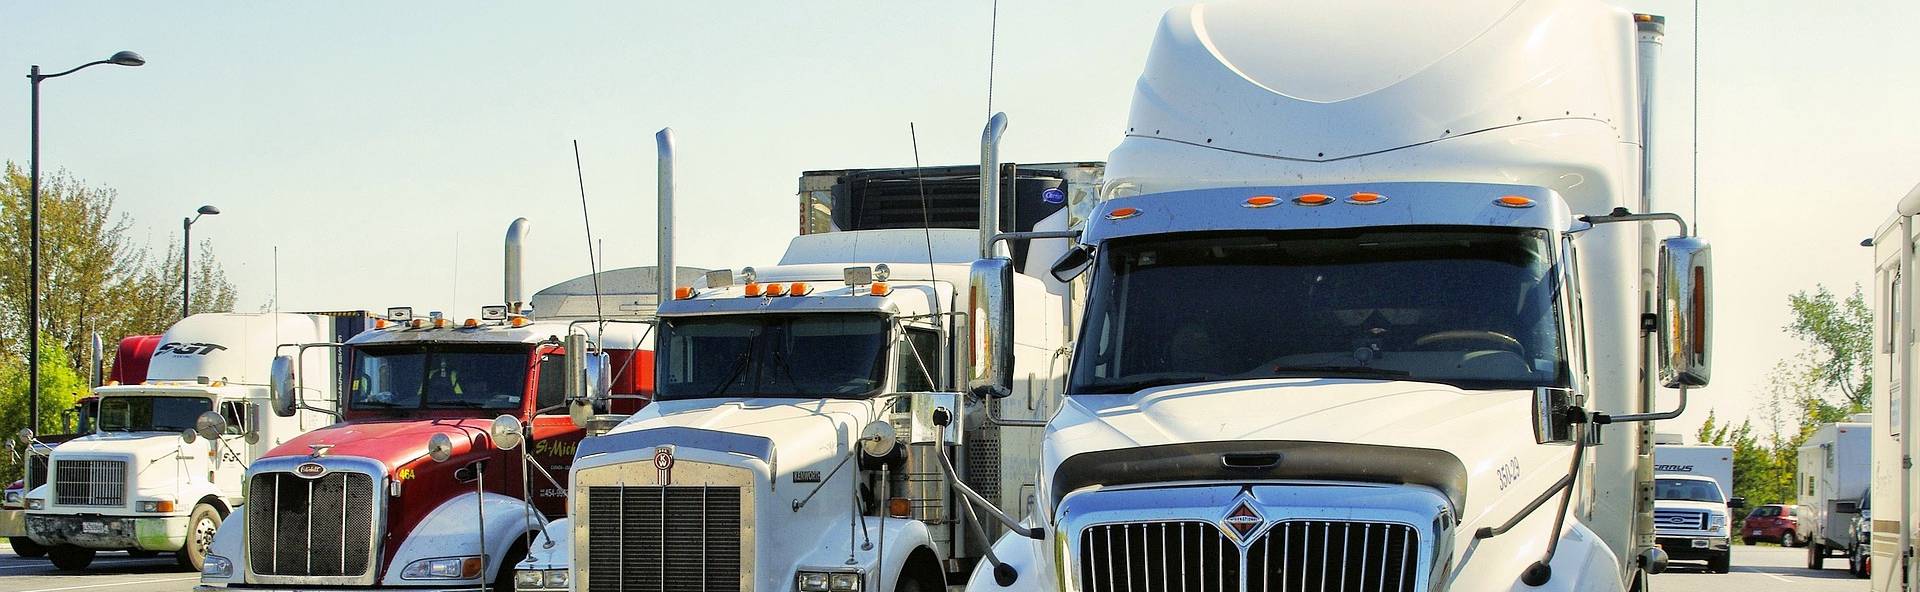 What Are The Most Common Types of Truck Accidents?